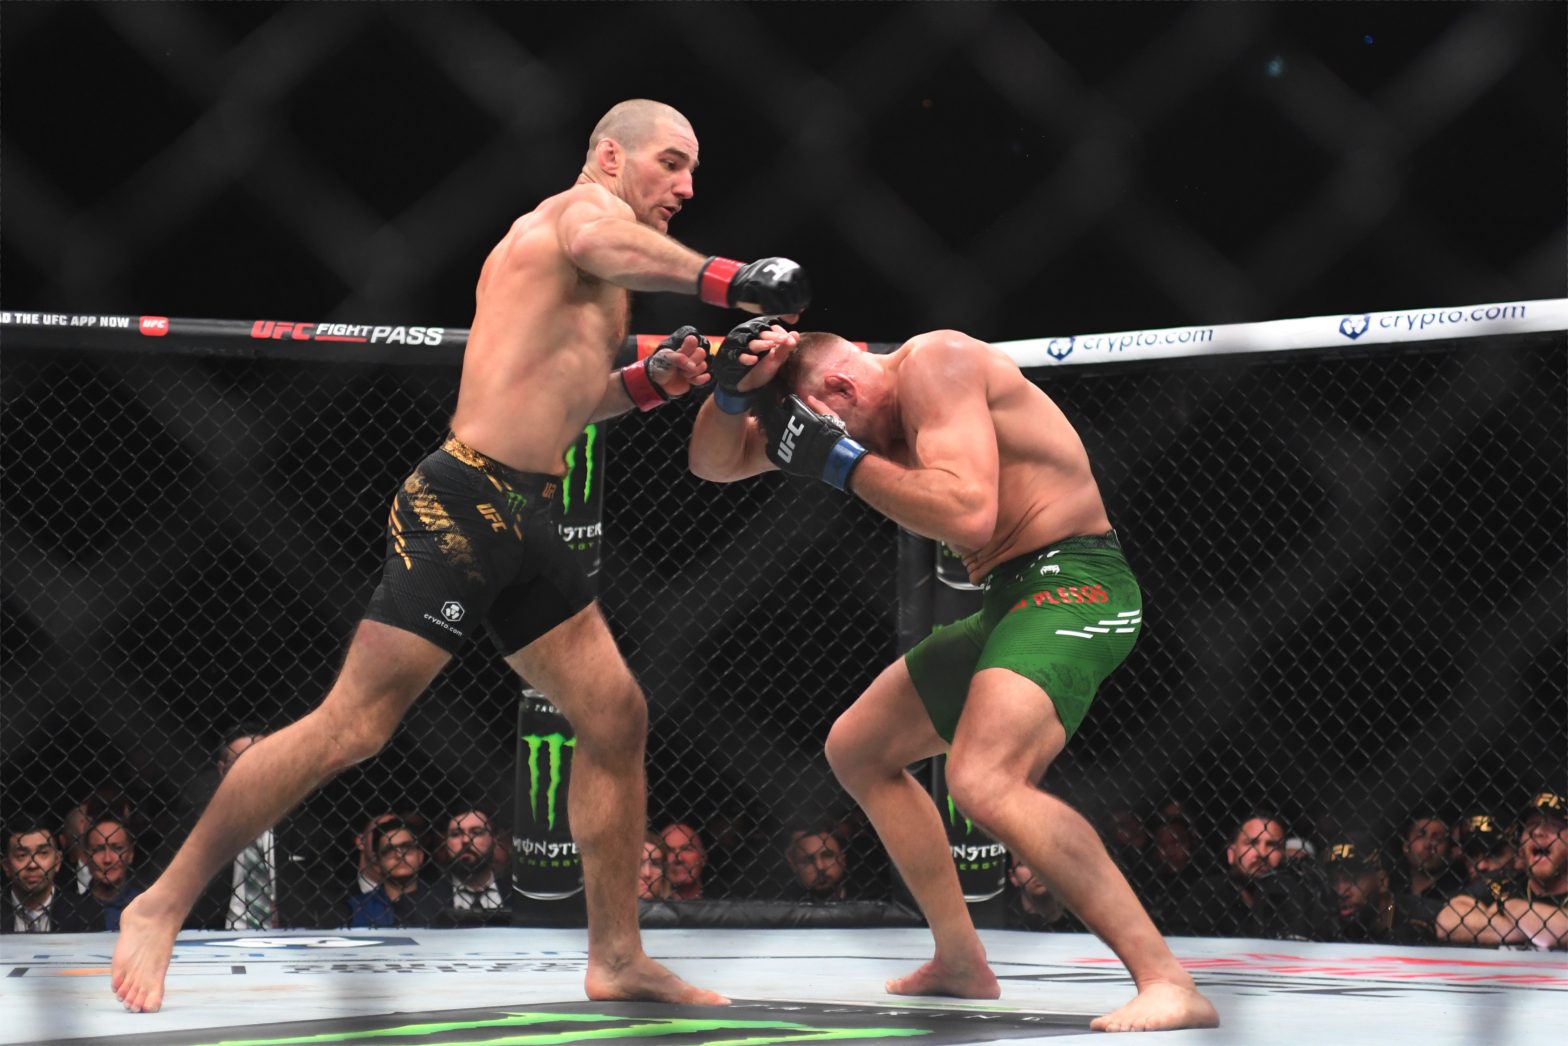 Sean Strickland makes case for Dricus Du Plessis rematch: ‘Dana himself thought I won’